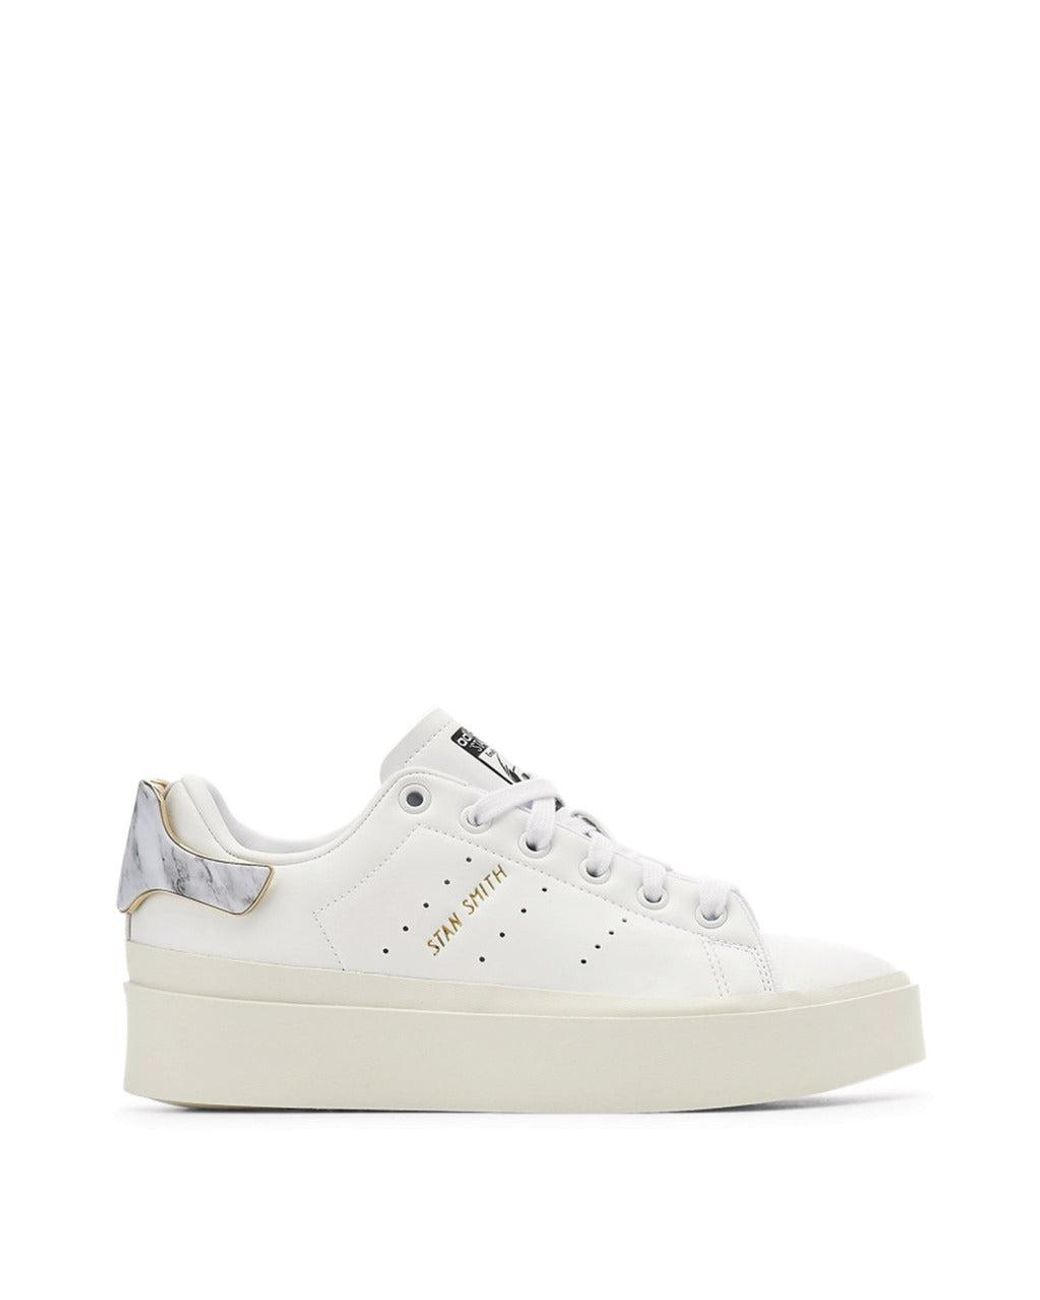 adidas Stansmith in White | Lyst